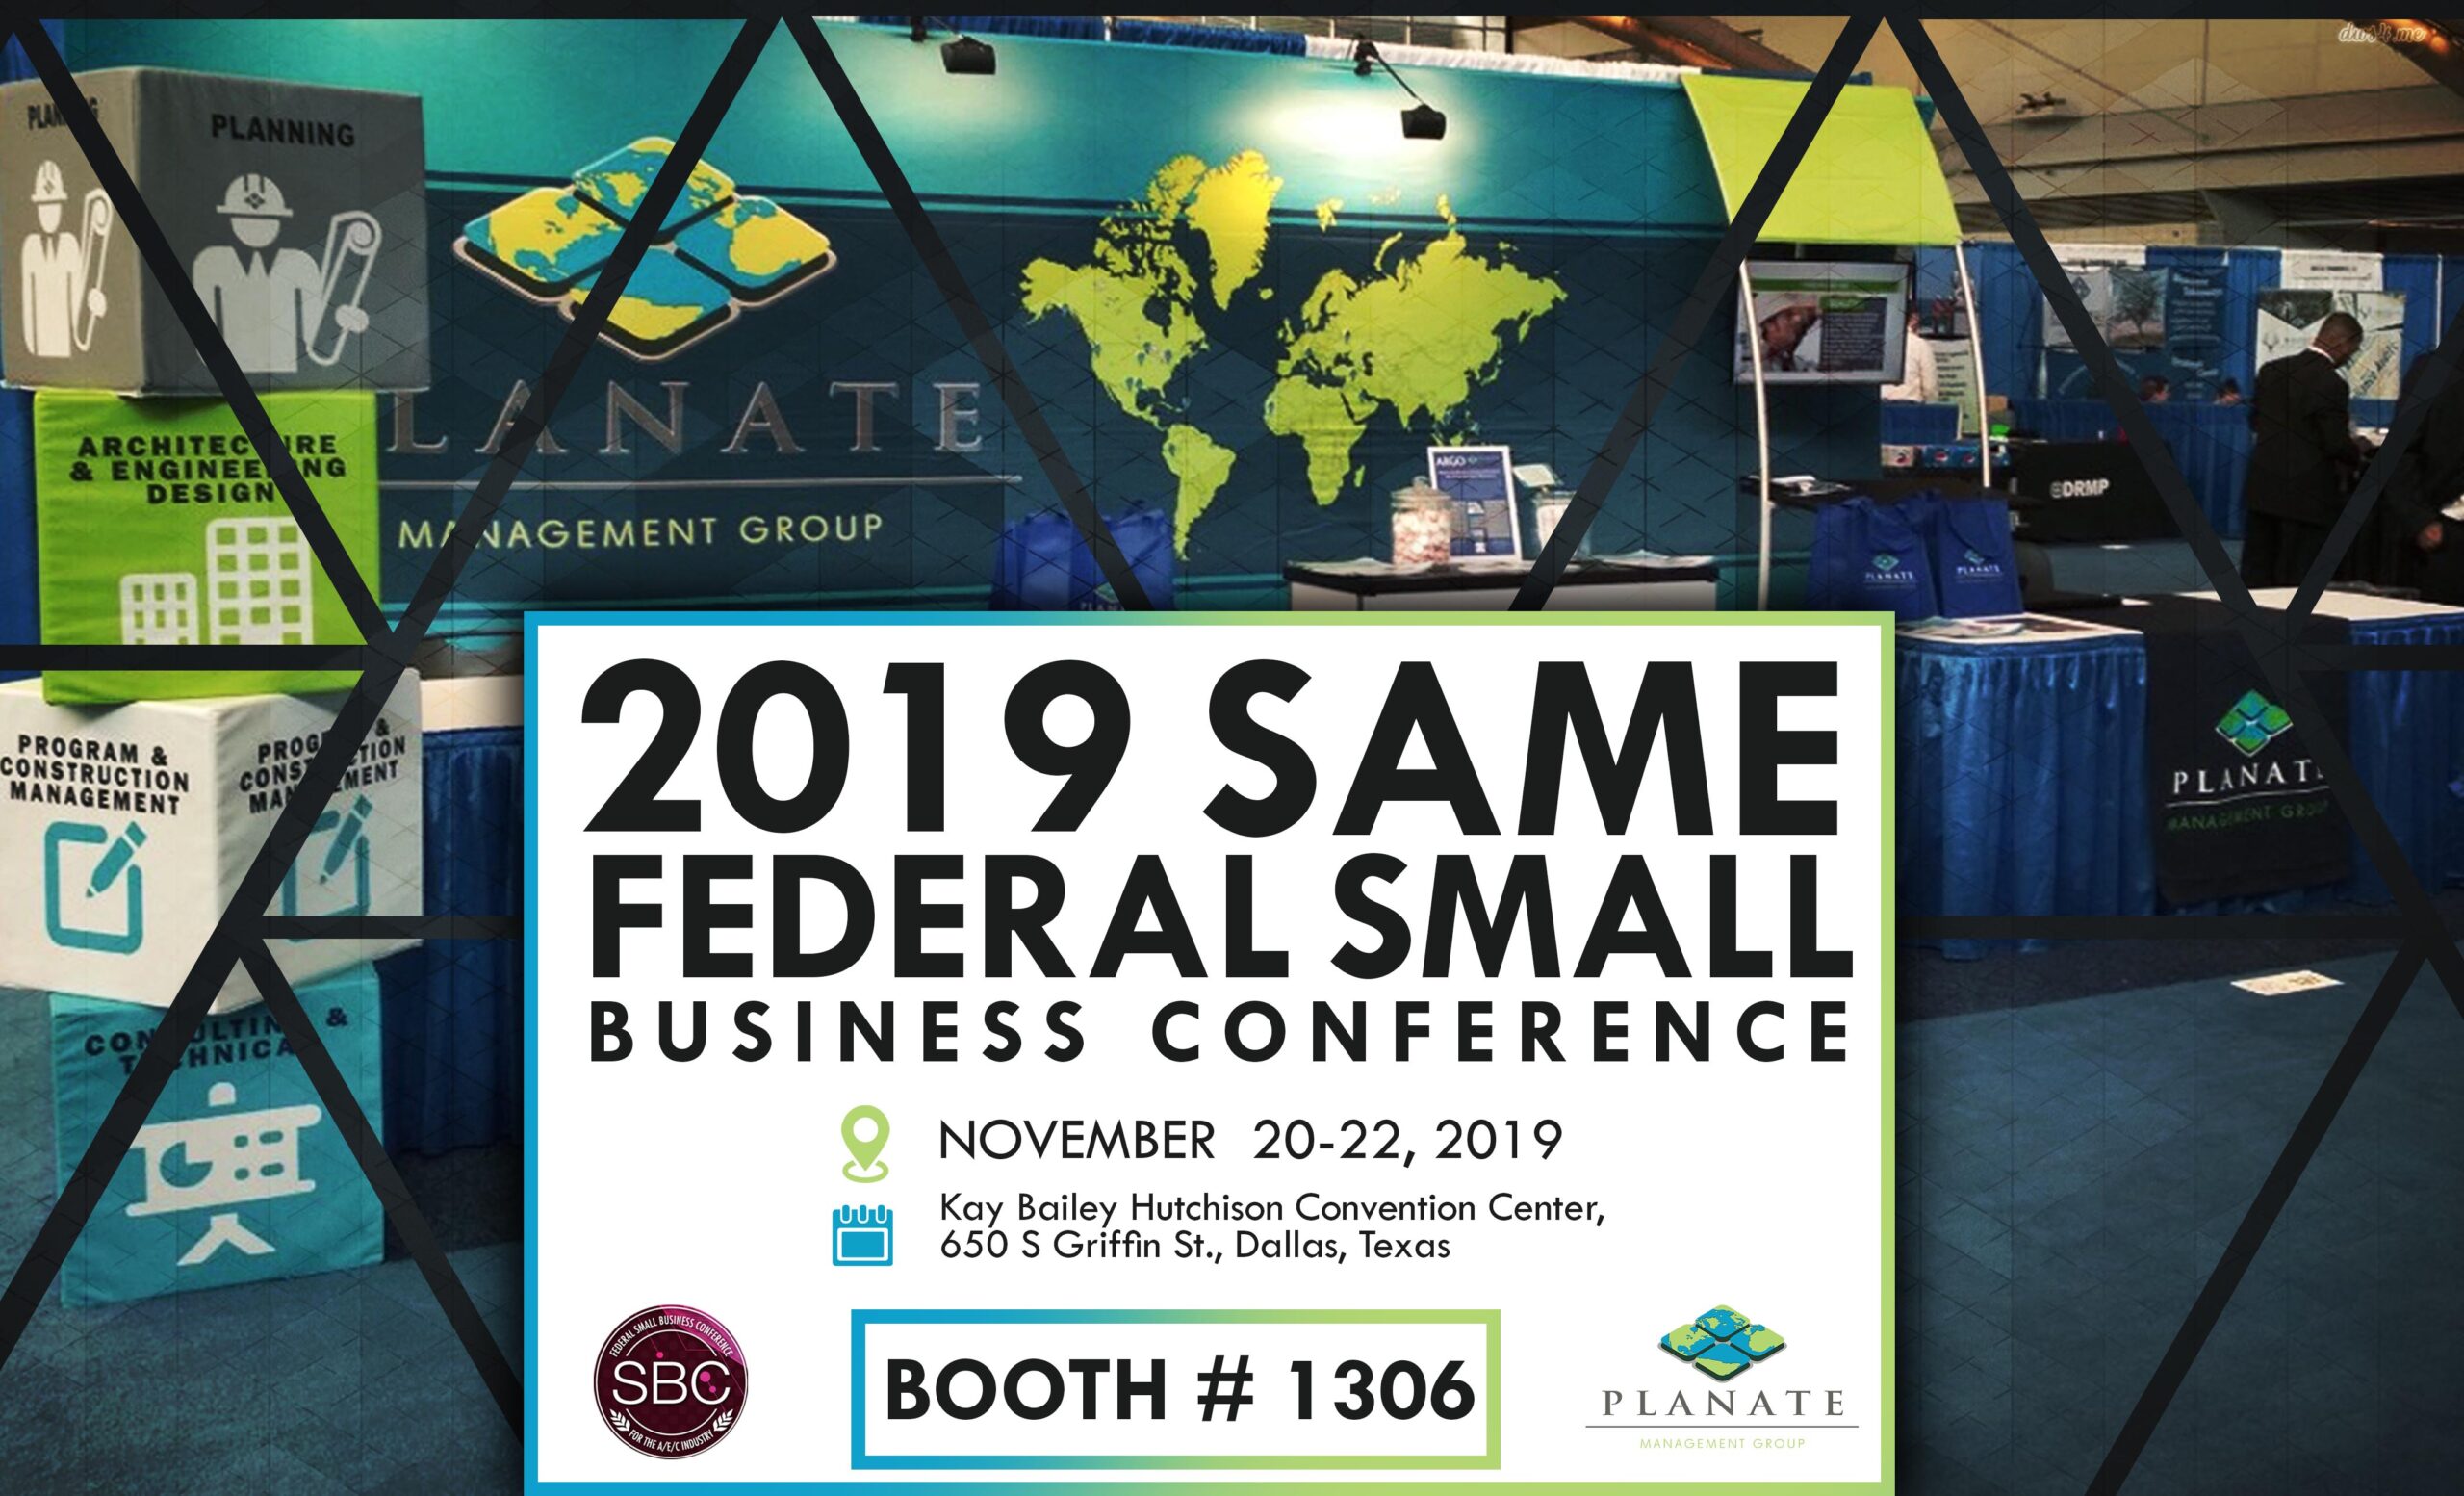 2019 SAME Federal Small Business Conference Planate Management Group